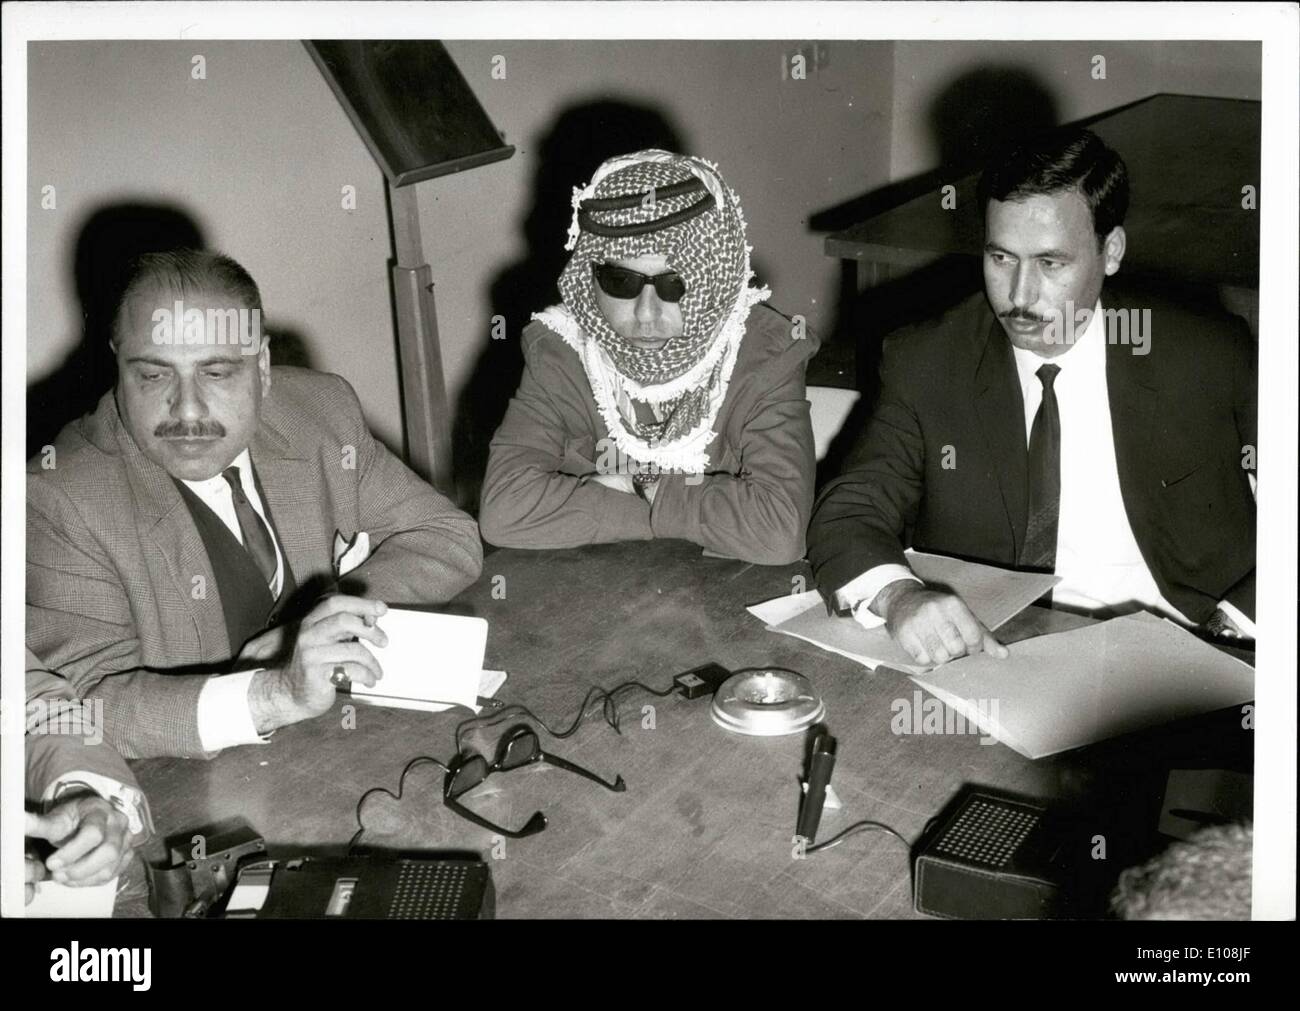 Mar. 03, 1970 - Dr. Isam head of the iou Saratawi Committee for the Liberation of Palestine during the press conference (Middle) and on the right side lawyer Mousa A'raj, and in the left side a journalist who will defend 3  charged with attaching Israeli pla in Munich. Stock Photo